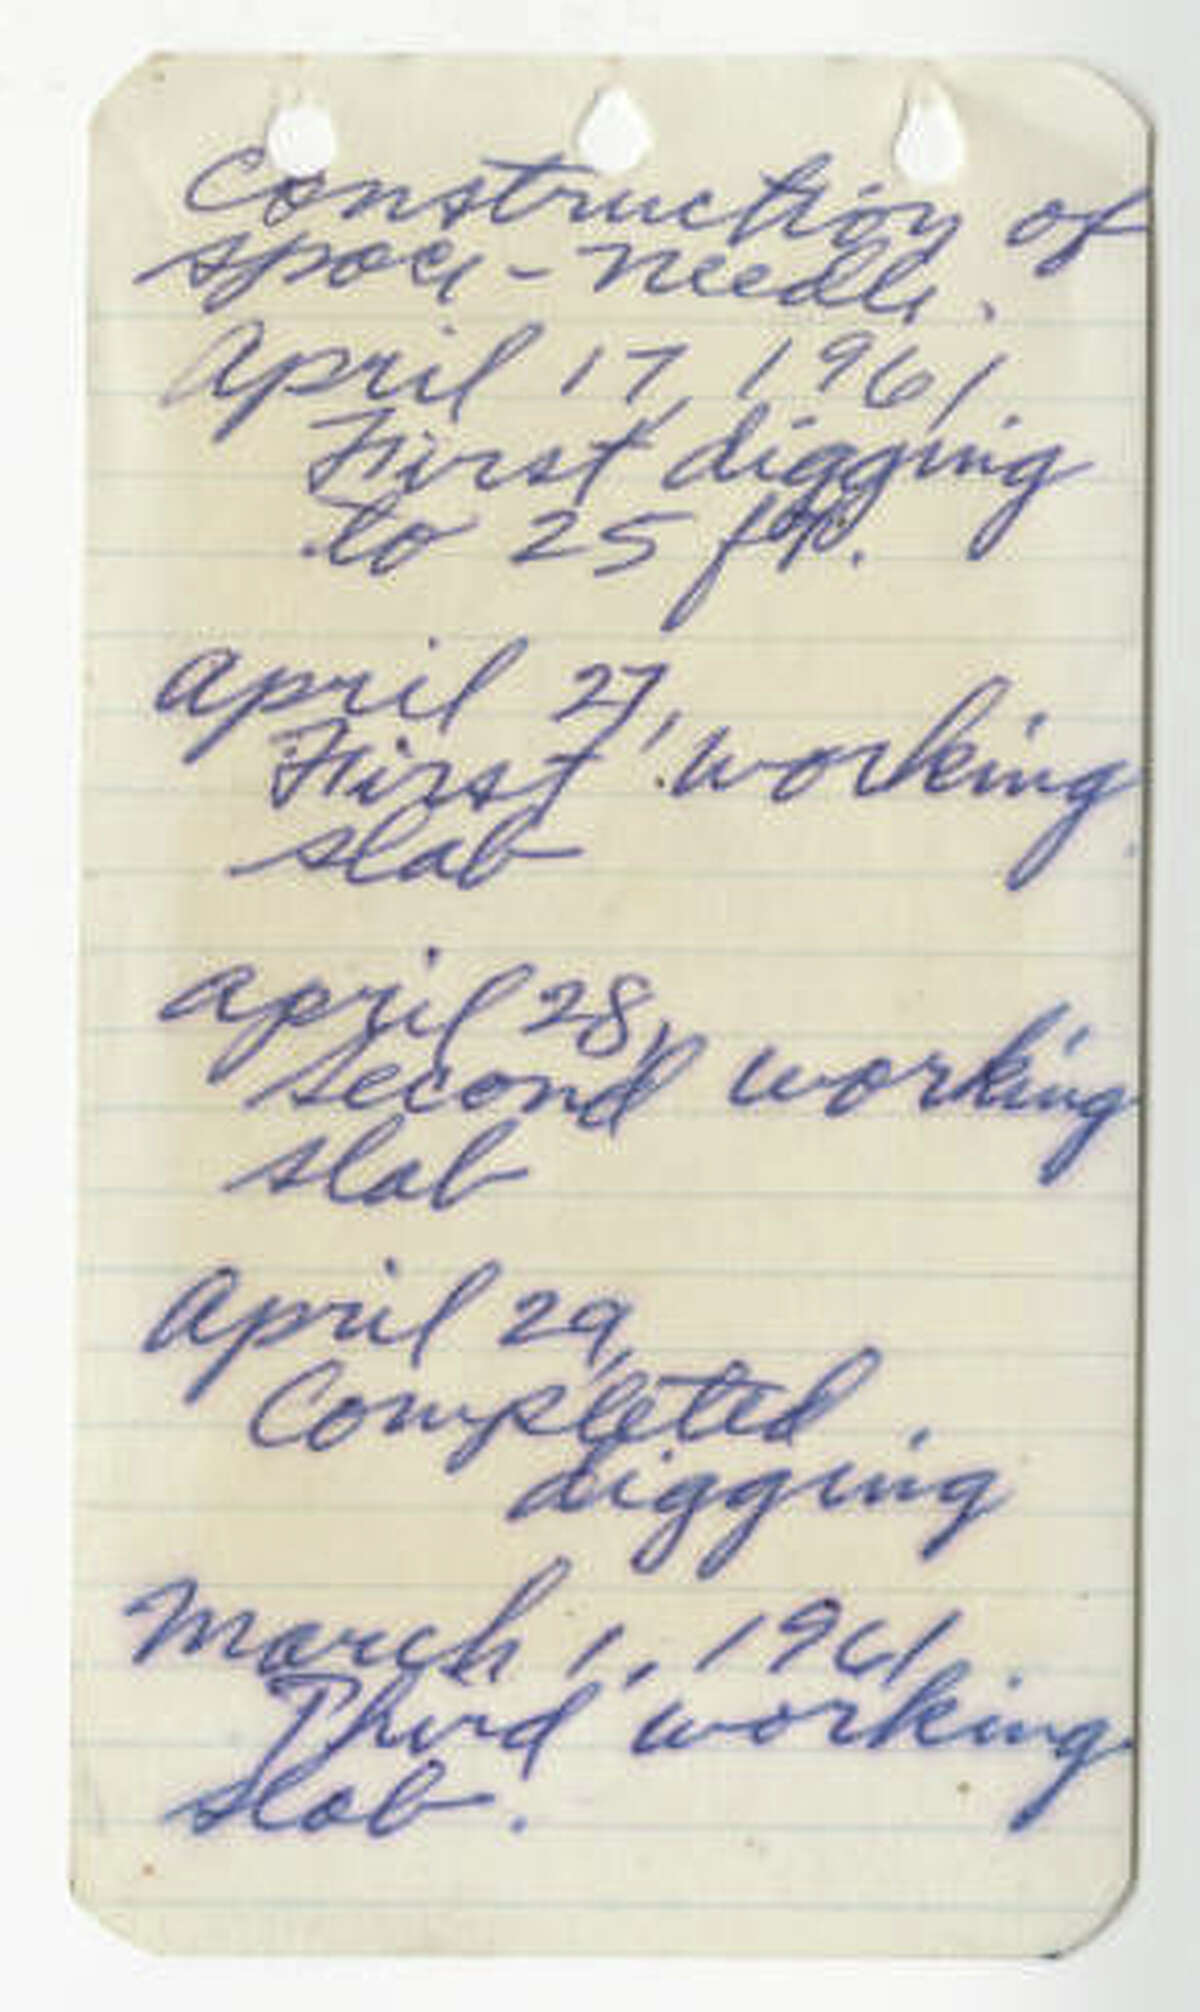 This image shows the first page of a notebook kept by George Gulacsik, who was hired by John Graham to photograph the construction of the Space Needle.